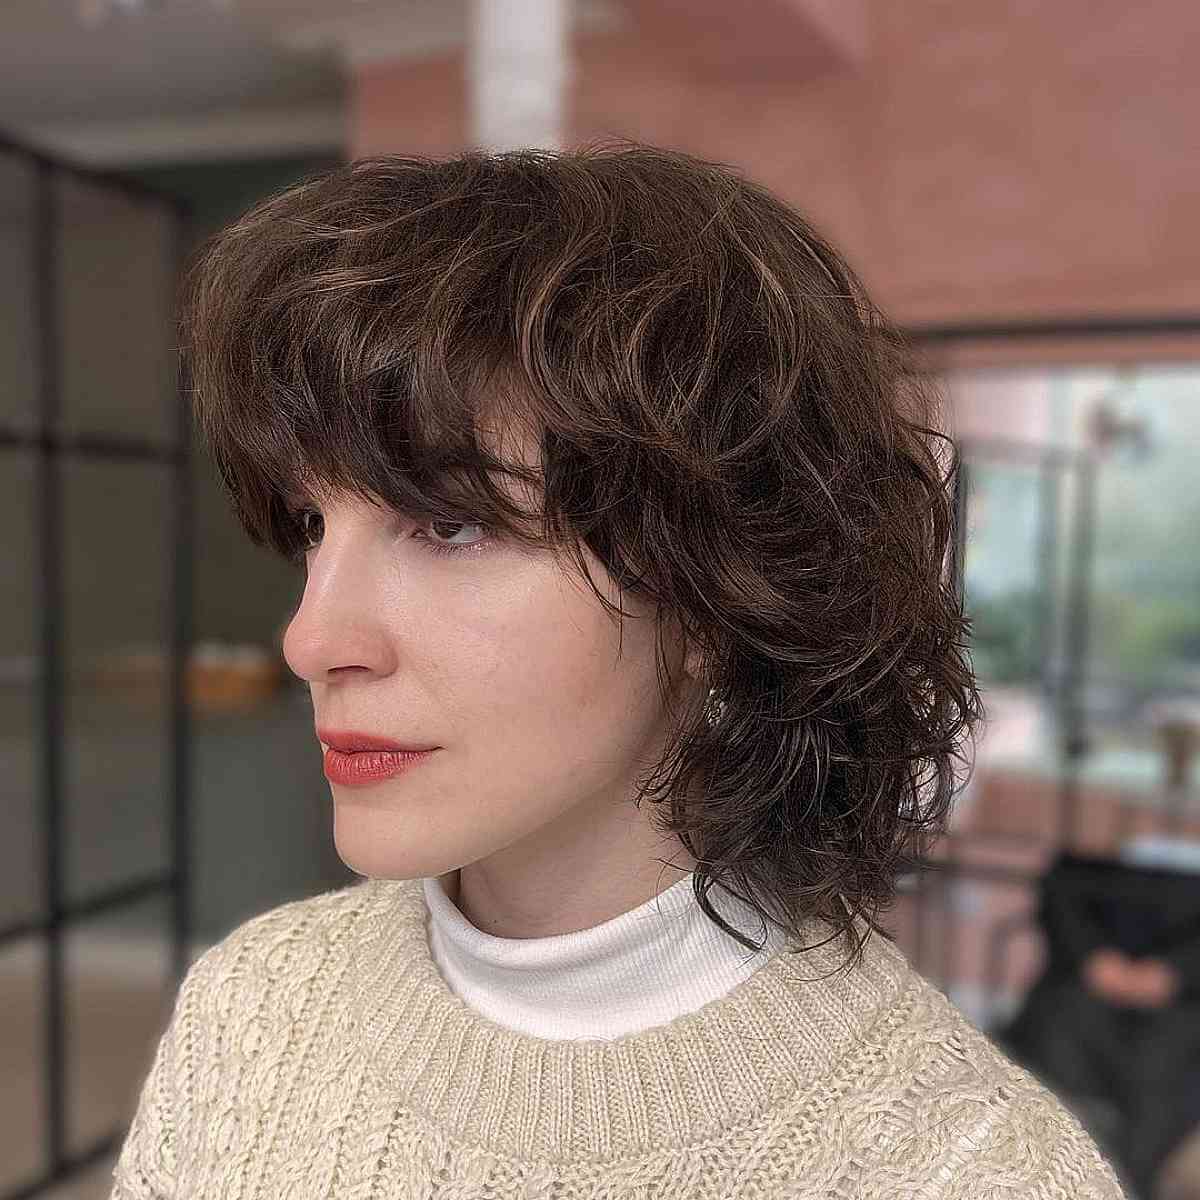 Short Layered Shag with Bangs for Oval Faces with Thick Wavy Hair